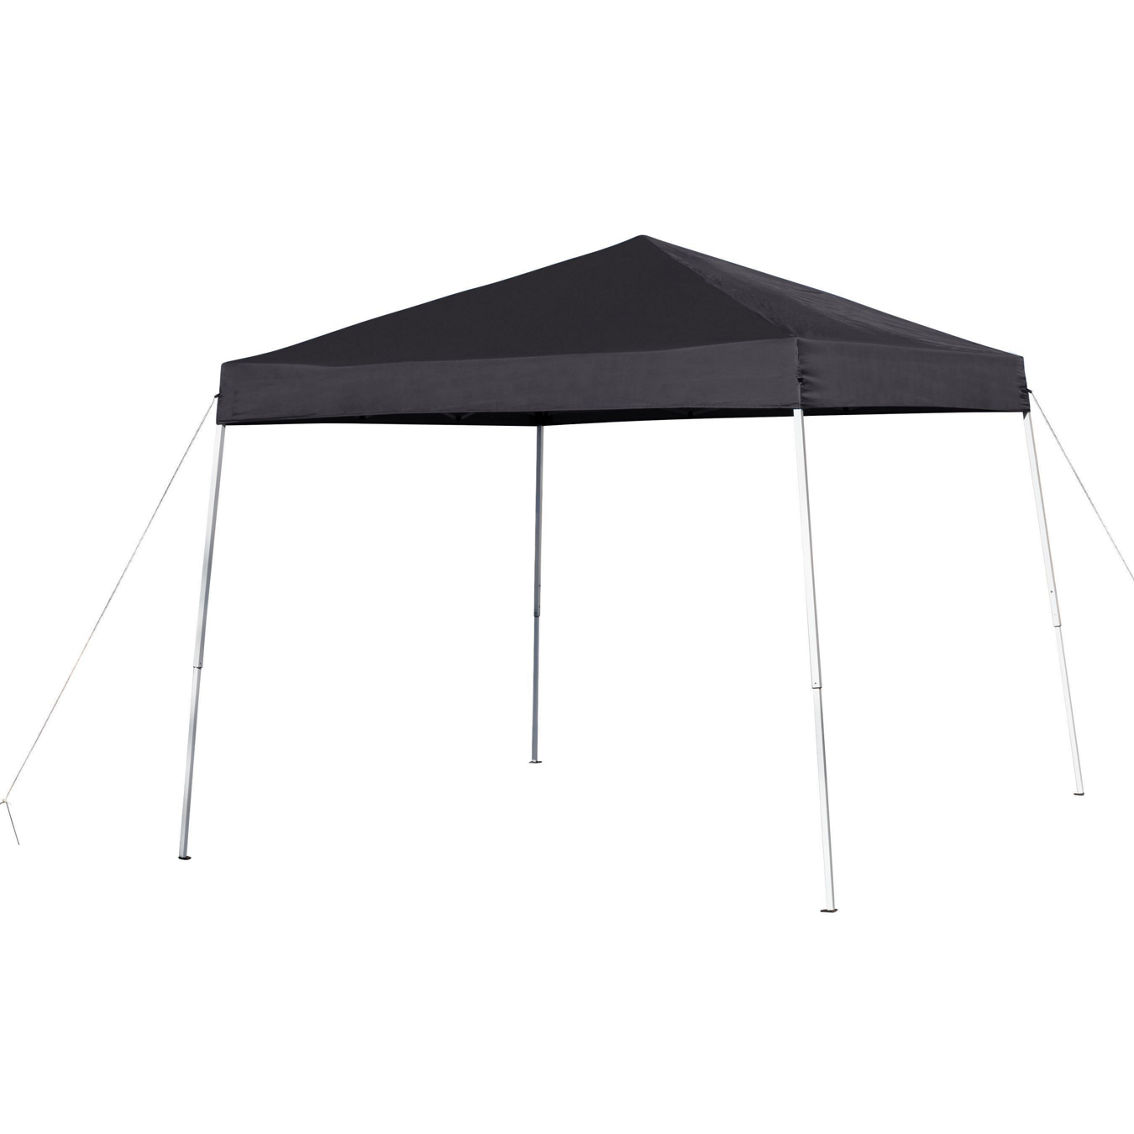 Flash Furniture 8'x8' Outdoor Pop Up Event Slanted Leg Canopy Tent with Carry Bag - Image 5 of 5